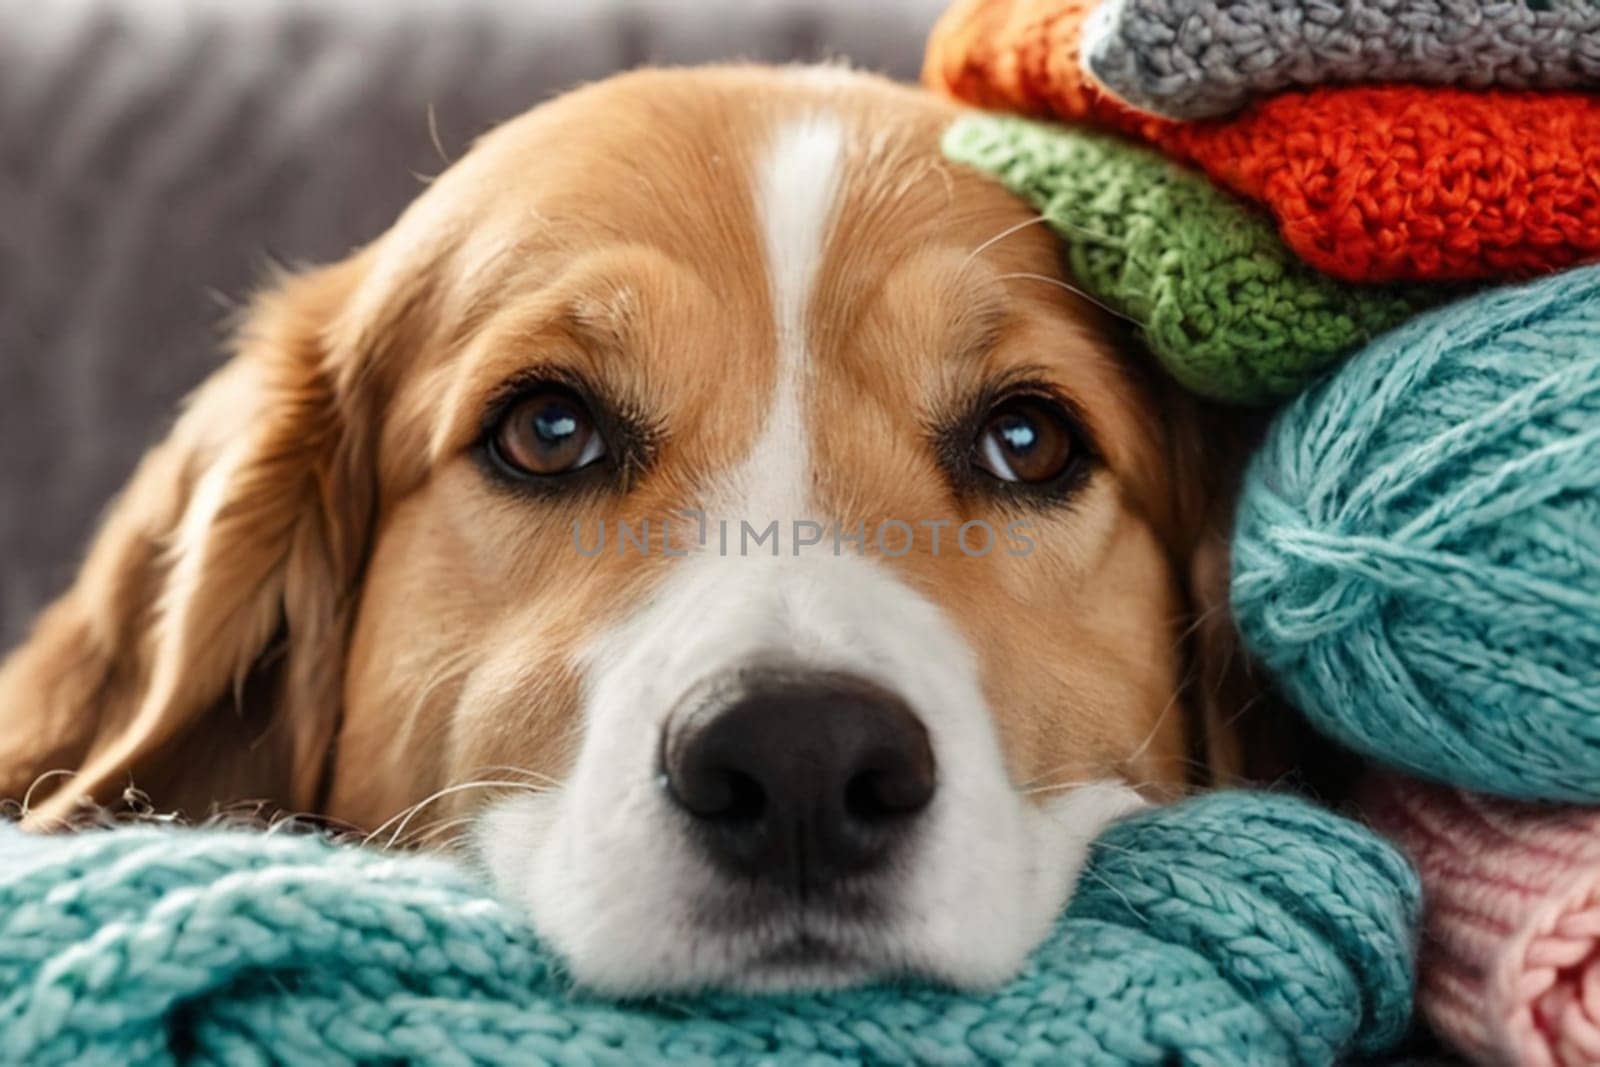 Funny dog sticks out its muzzle among woolen knitted clothes